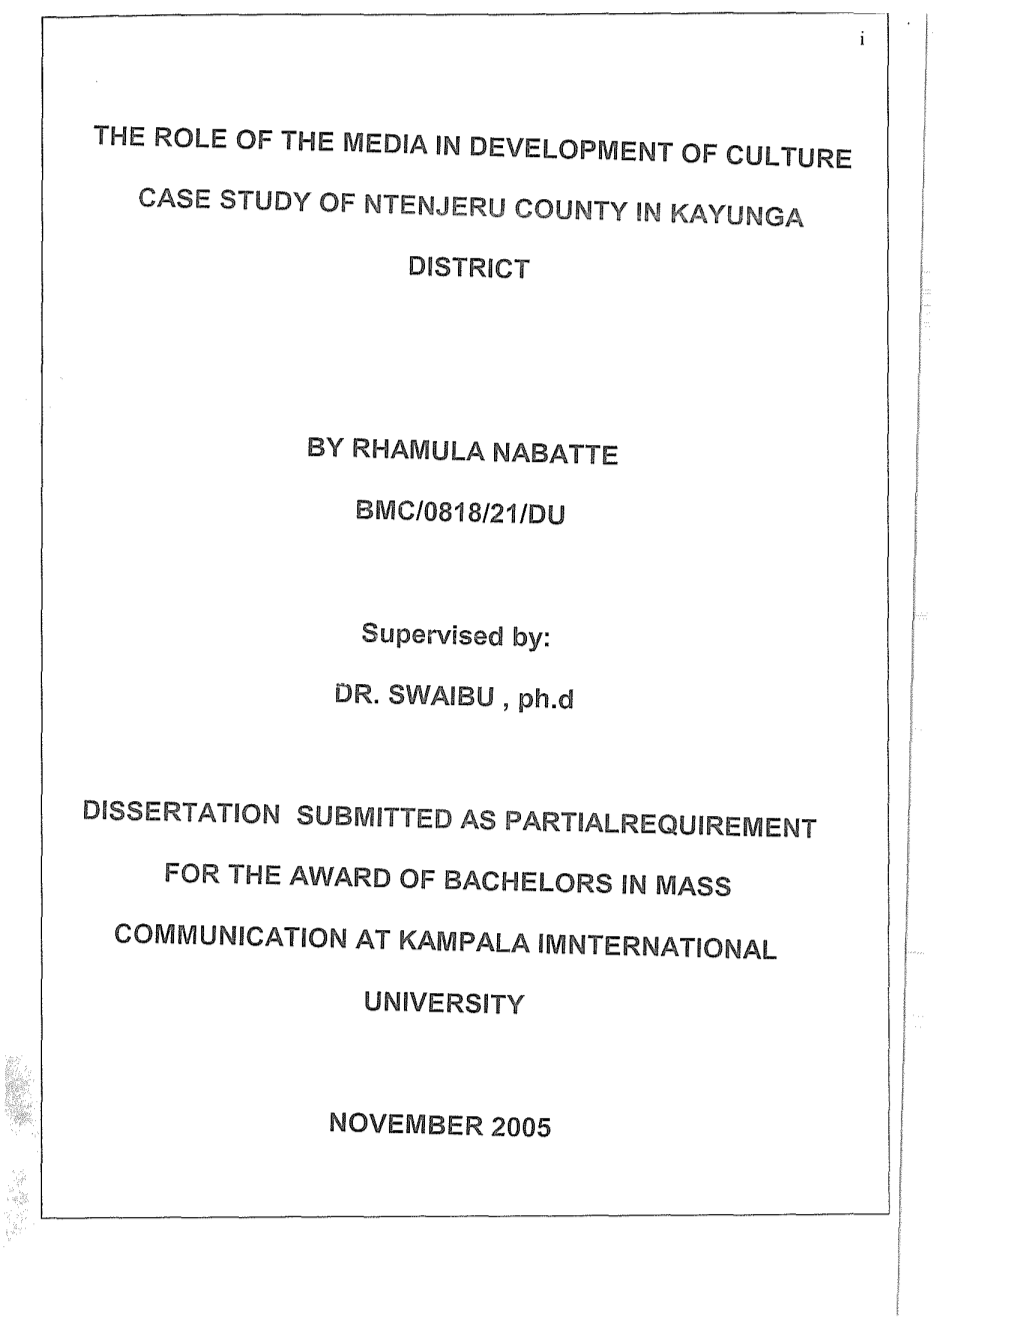 The Role of the Media in Development of Culture Case Study of Ntenjeru County in Kayunga District by Rhamula Nabatte Bmc/0818/21